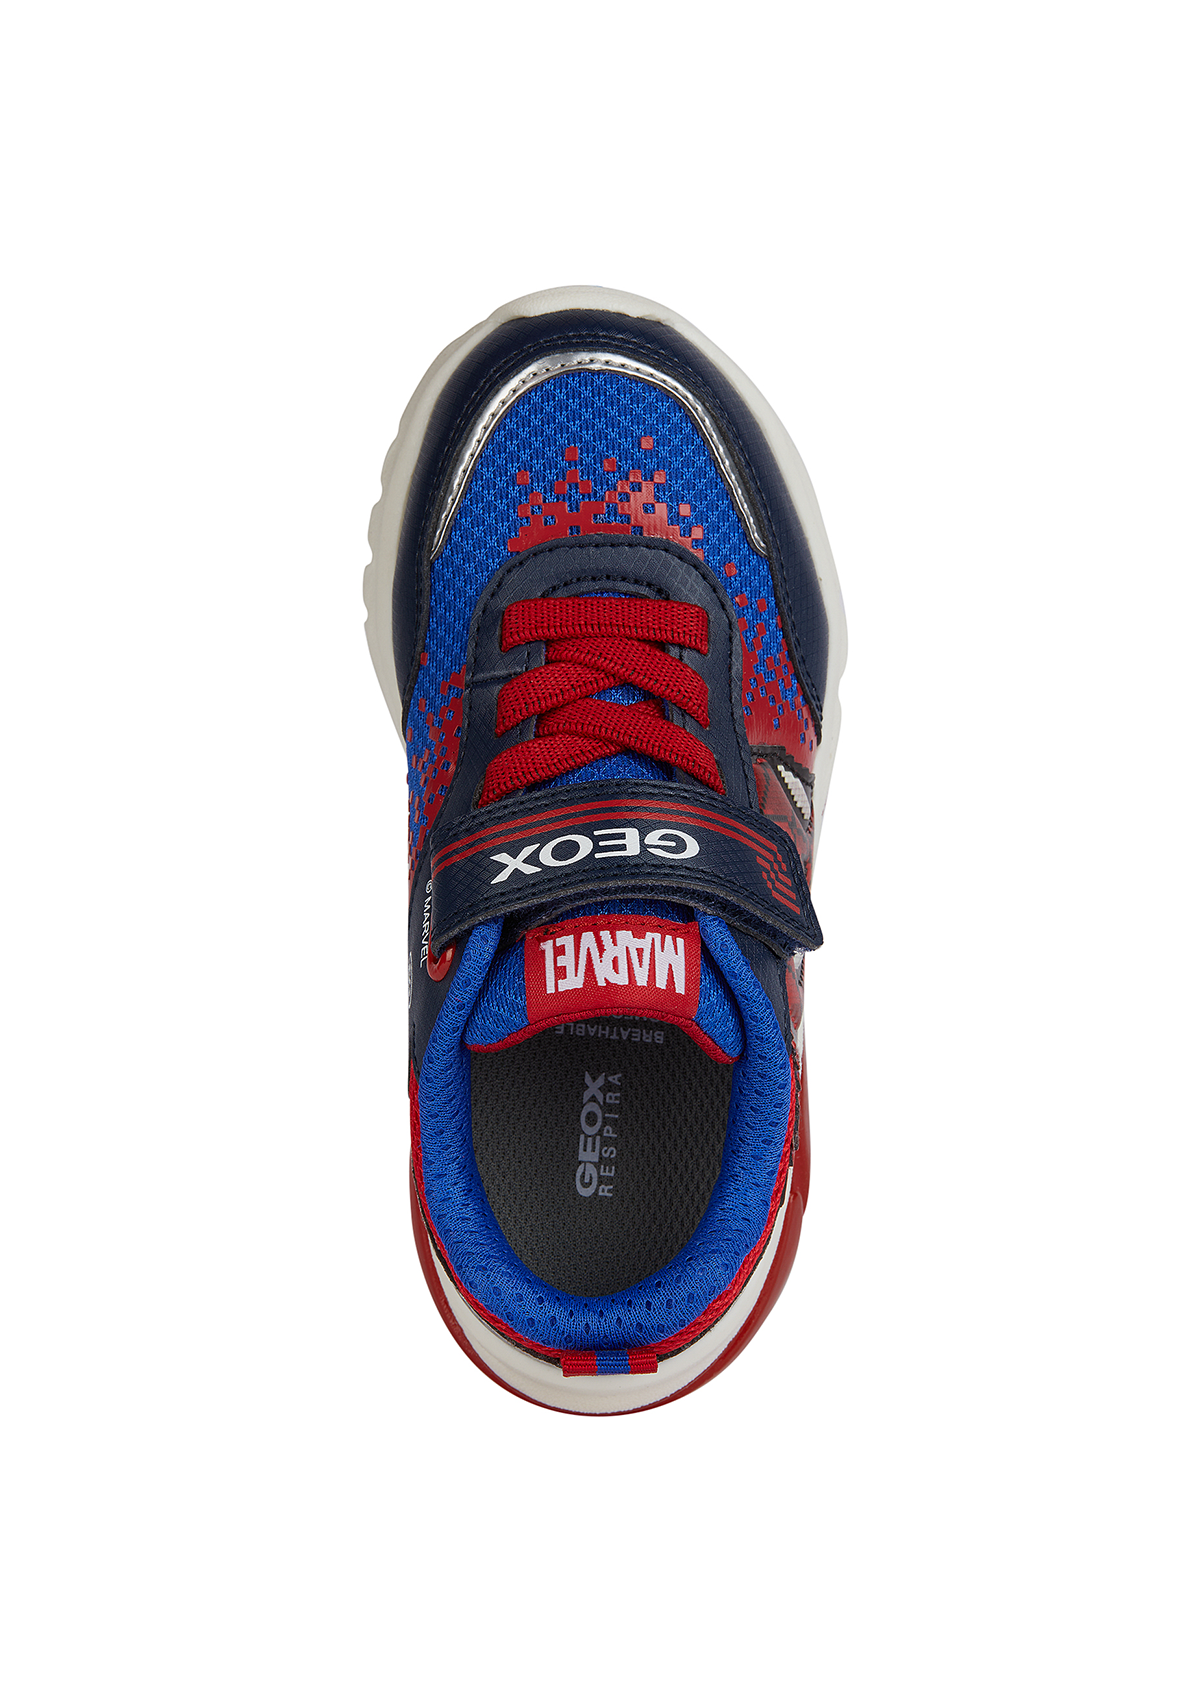 Geox Boys Trainer CIBERDRON Lights-Up Navy Red